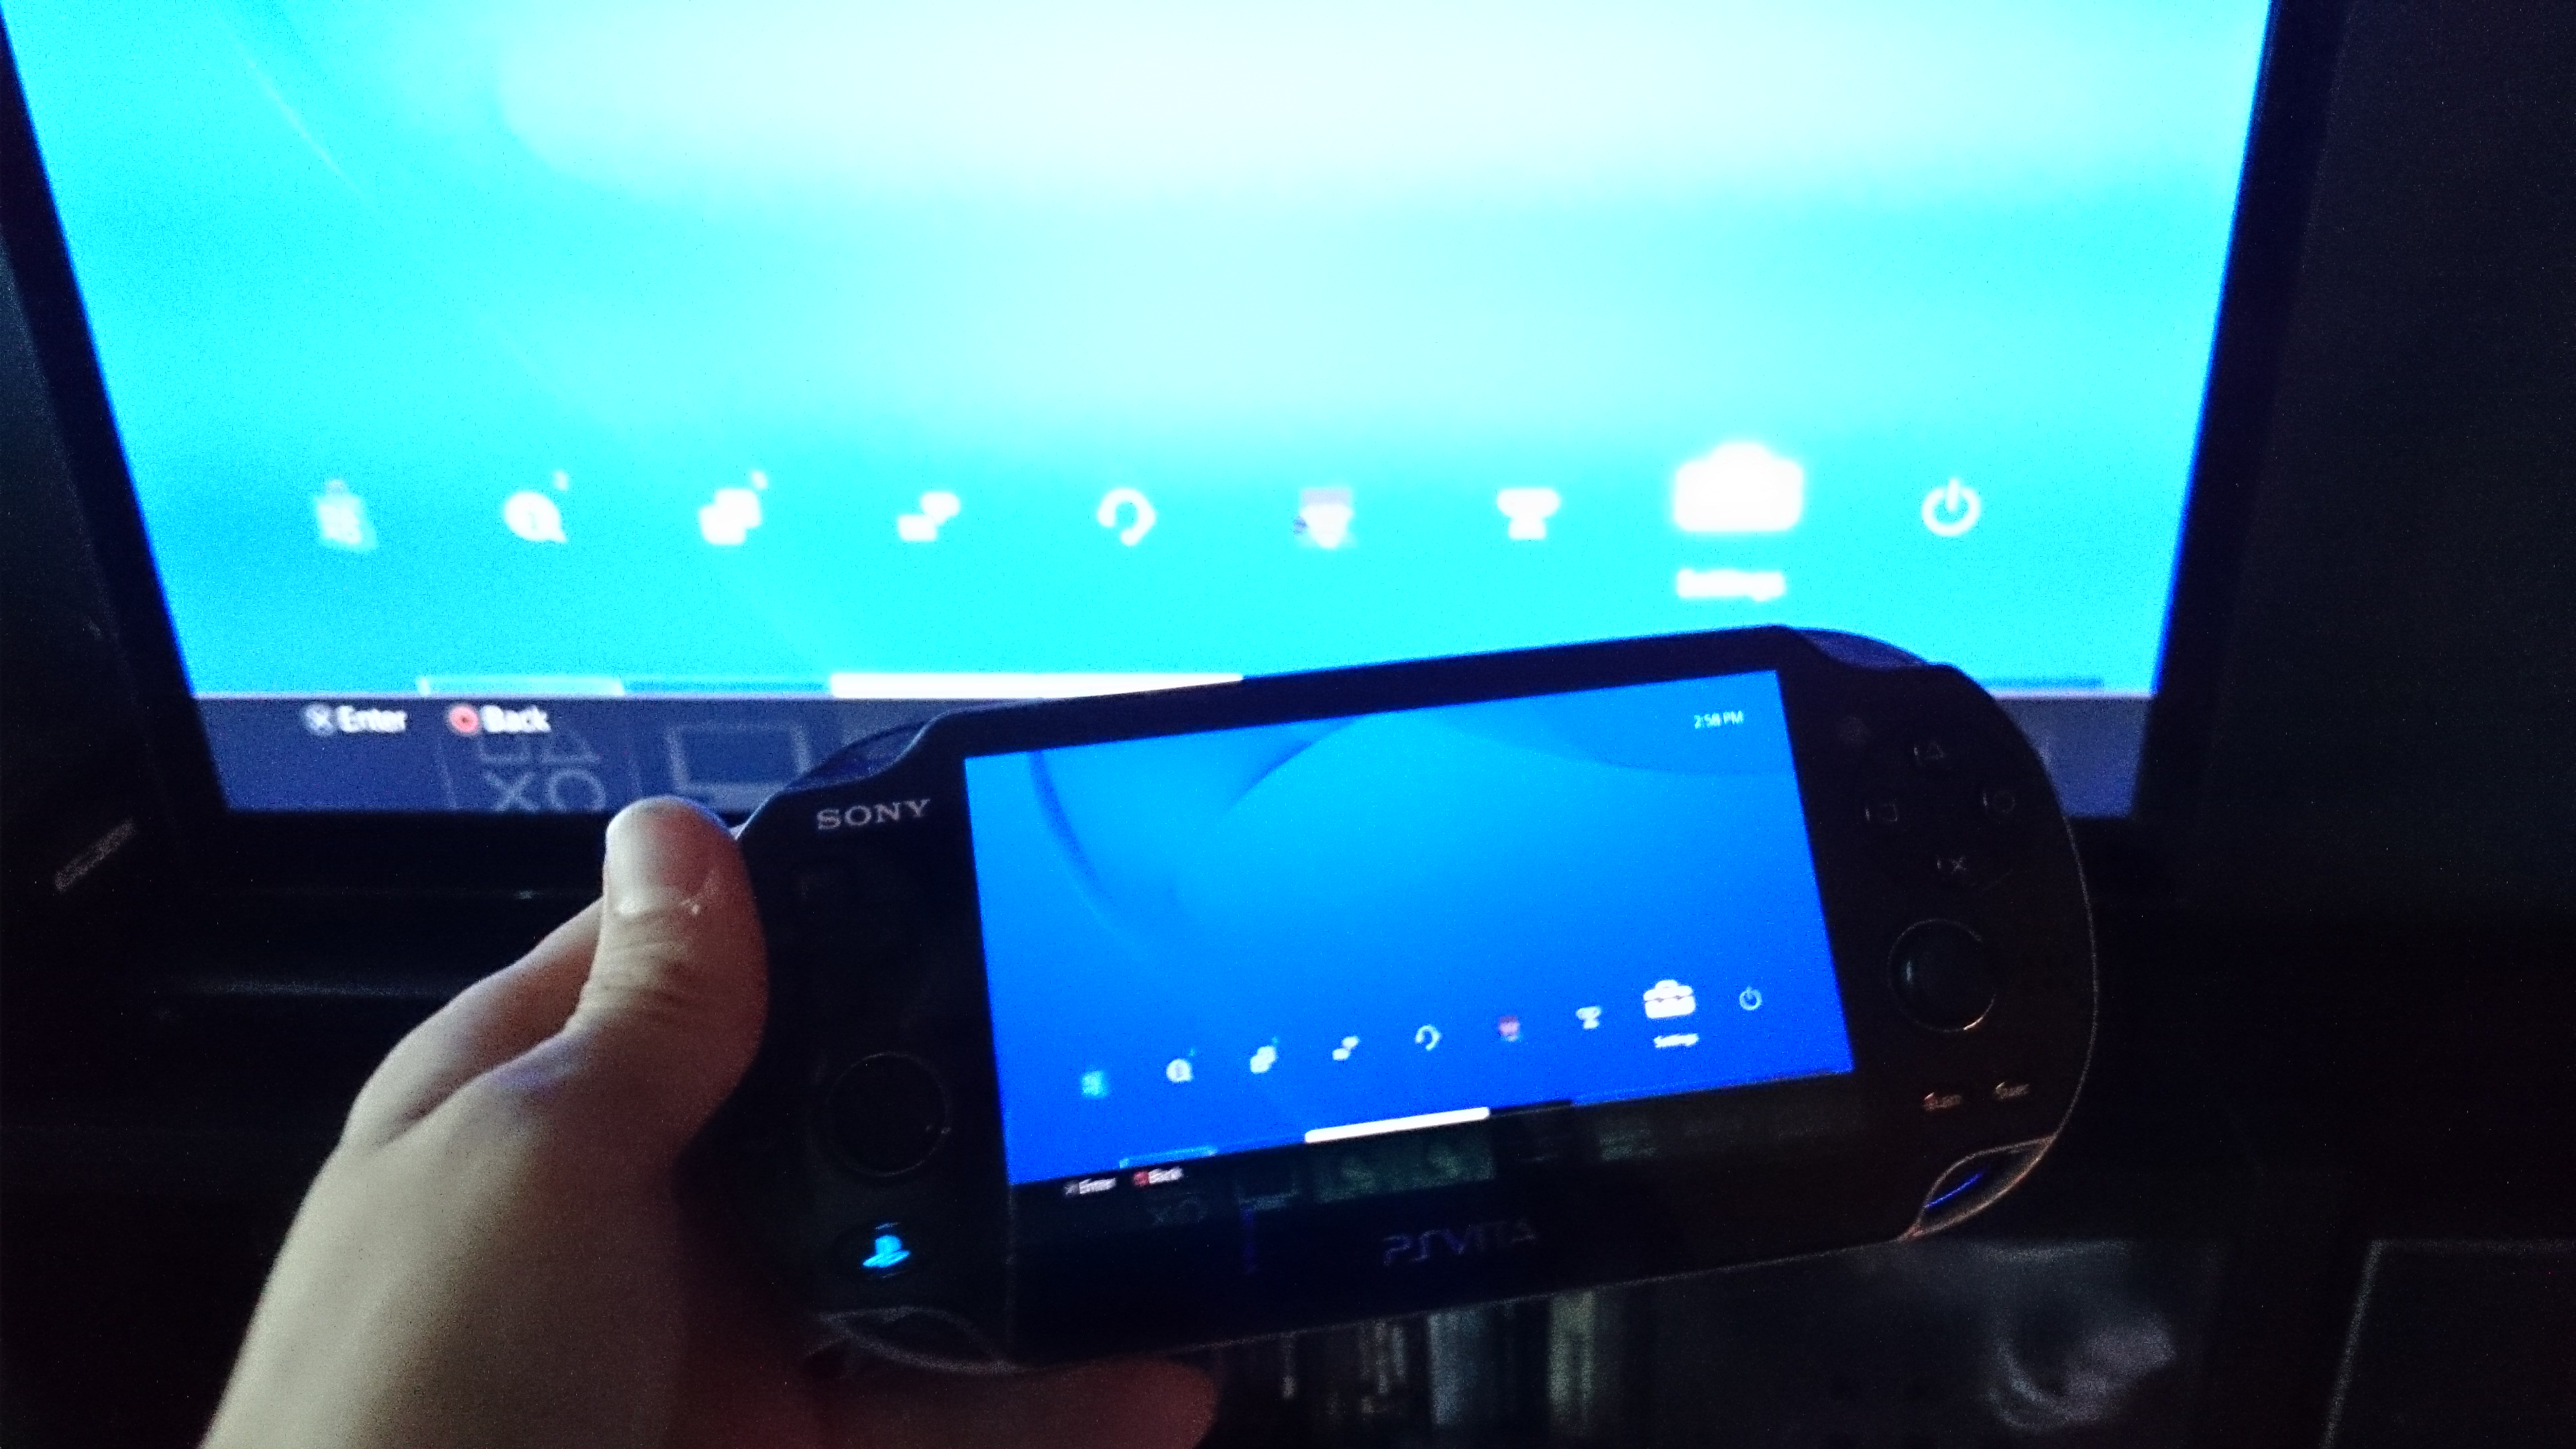 ps4 remote play ps3